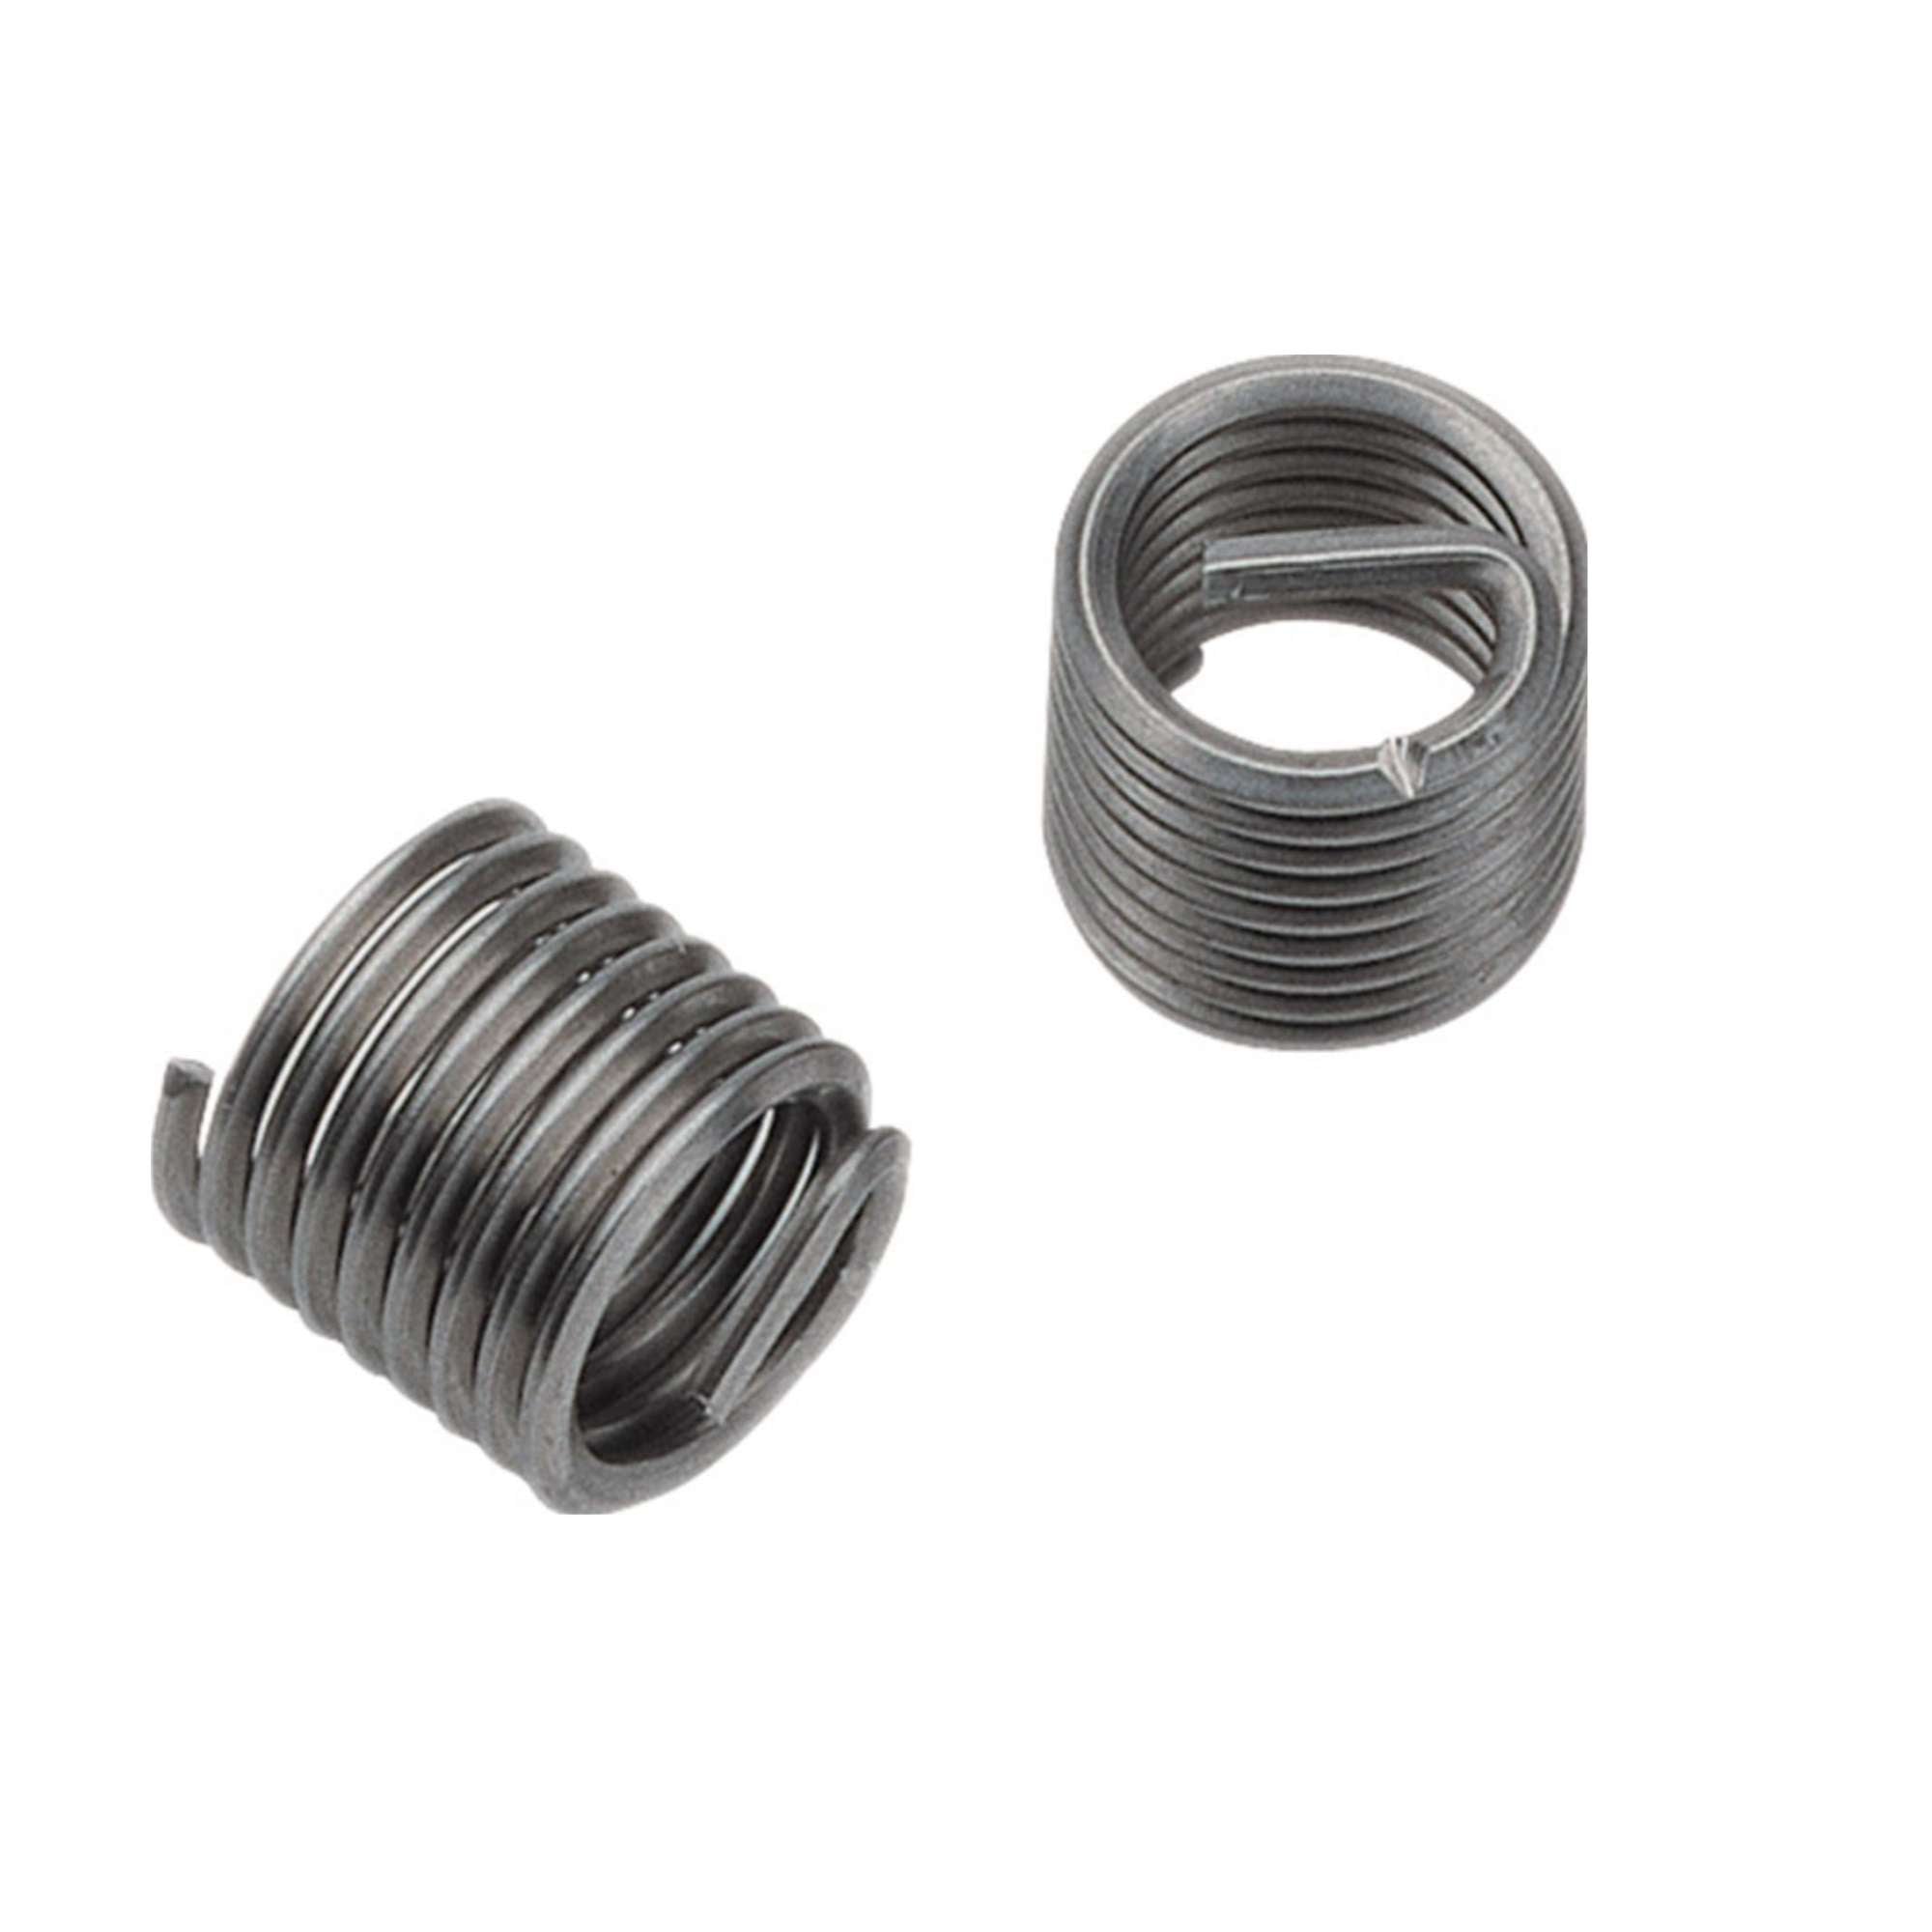 Plated threads, metric sizes height 1.5 D in stainless steel DIN 8140 Fermec